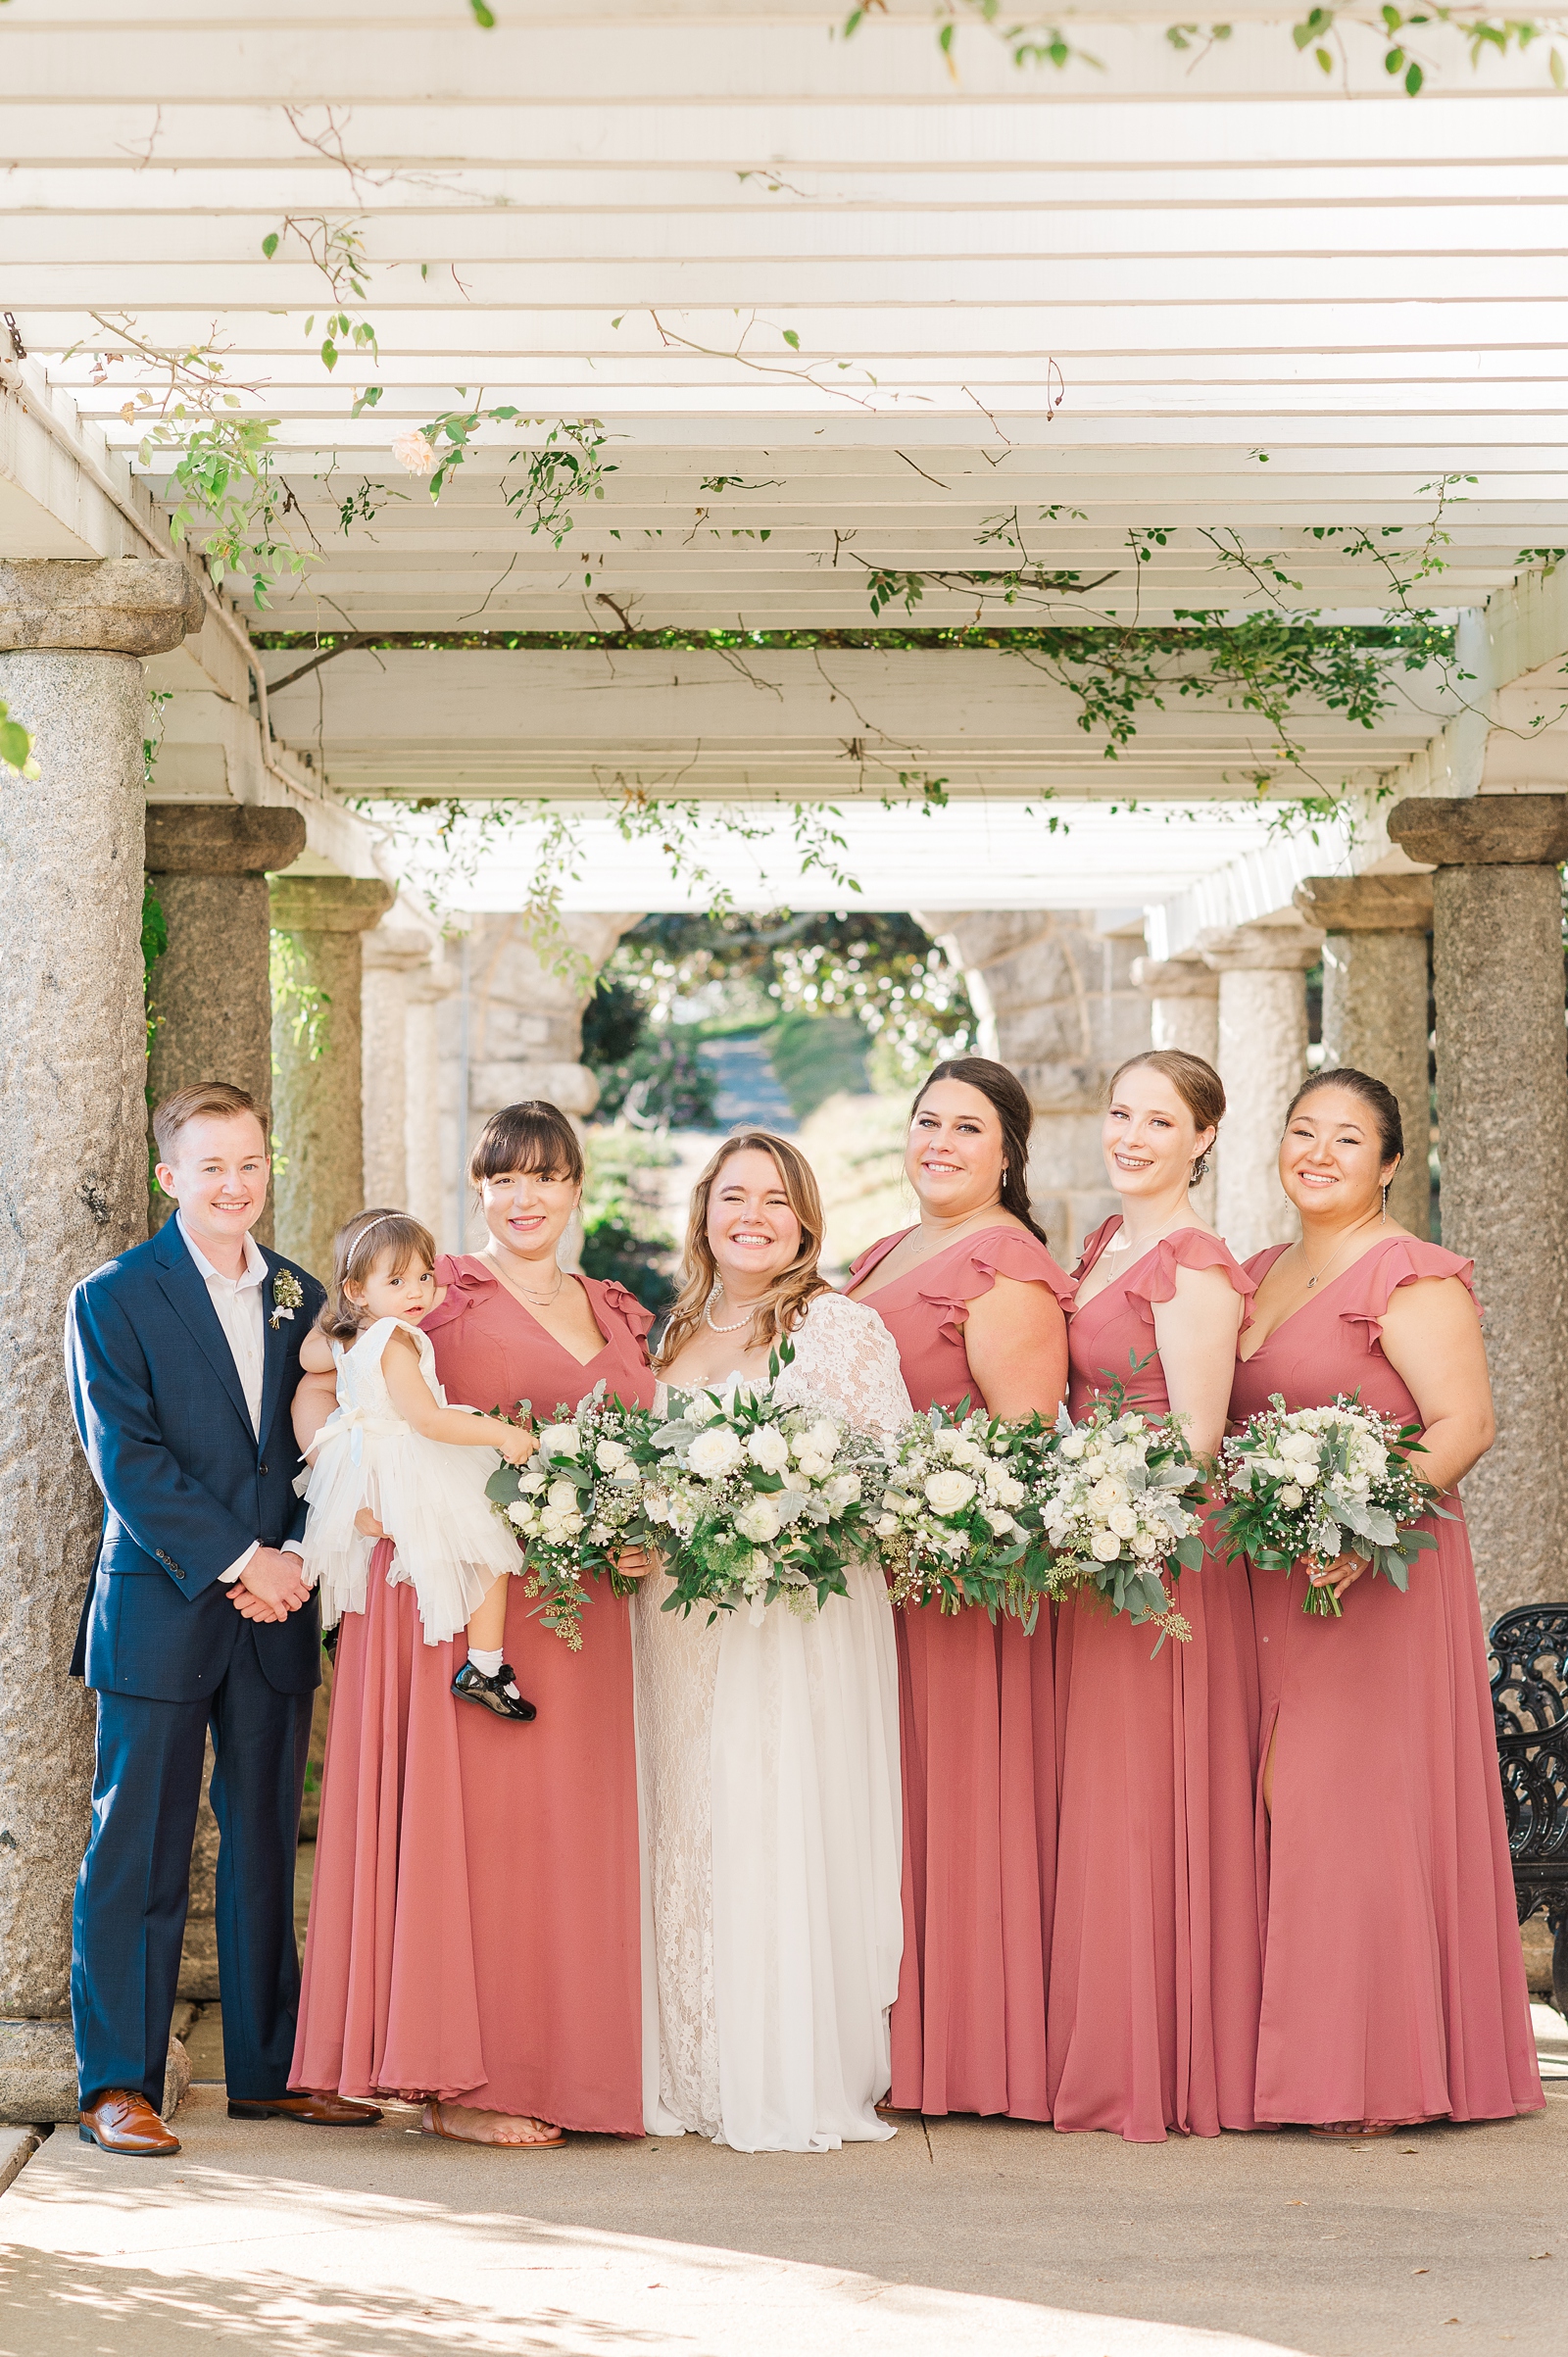 Bridesmaid Portraits with Pink Dresses and Flower Girl in the Italian Gardens at Maymont Wedding. Richmond Wedding Photographer Kailey Brianne Photography.